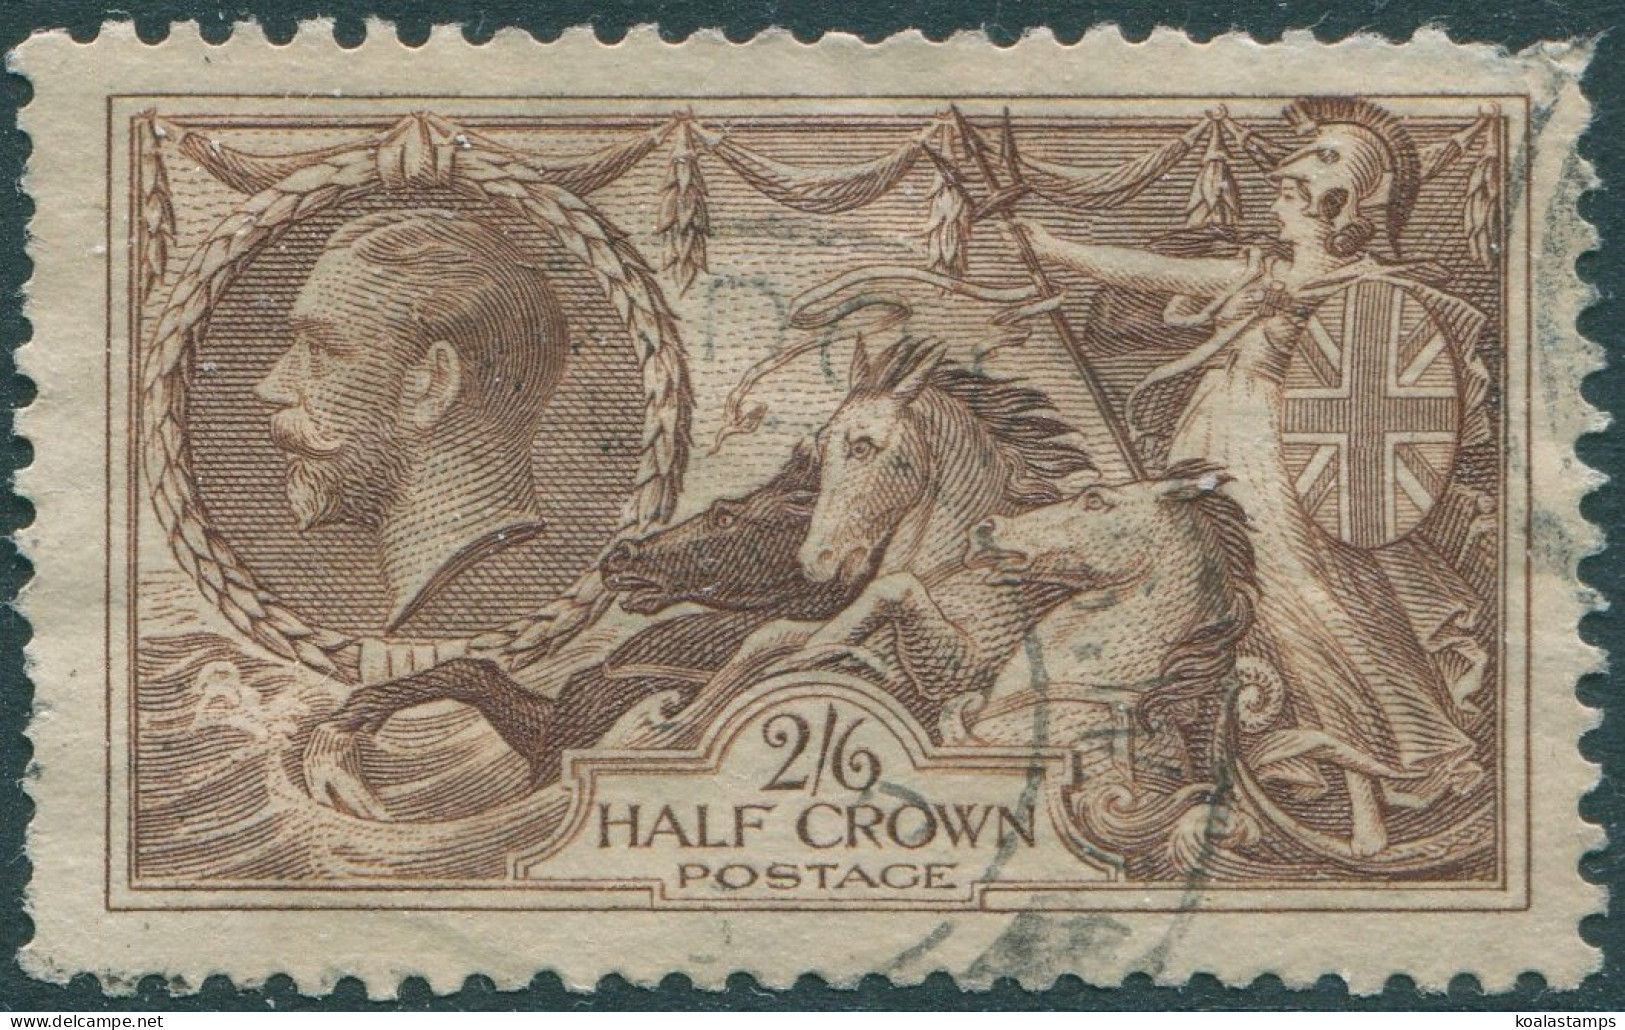 Great Britain 1934 SG450 2s.6d Chocolate-brown KGV #2 FU (amd) - Unclassified